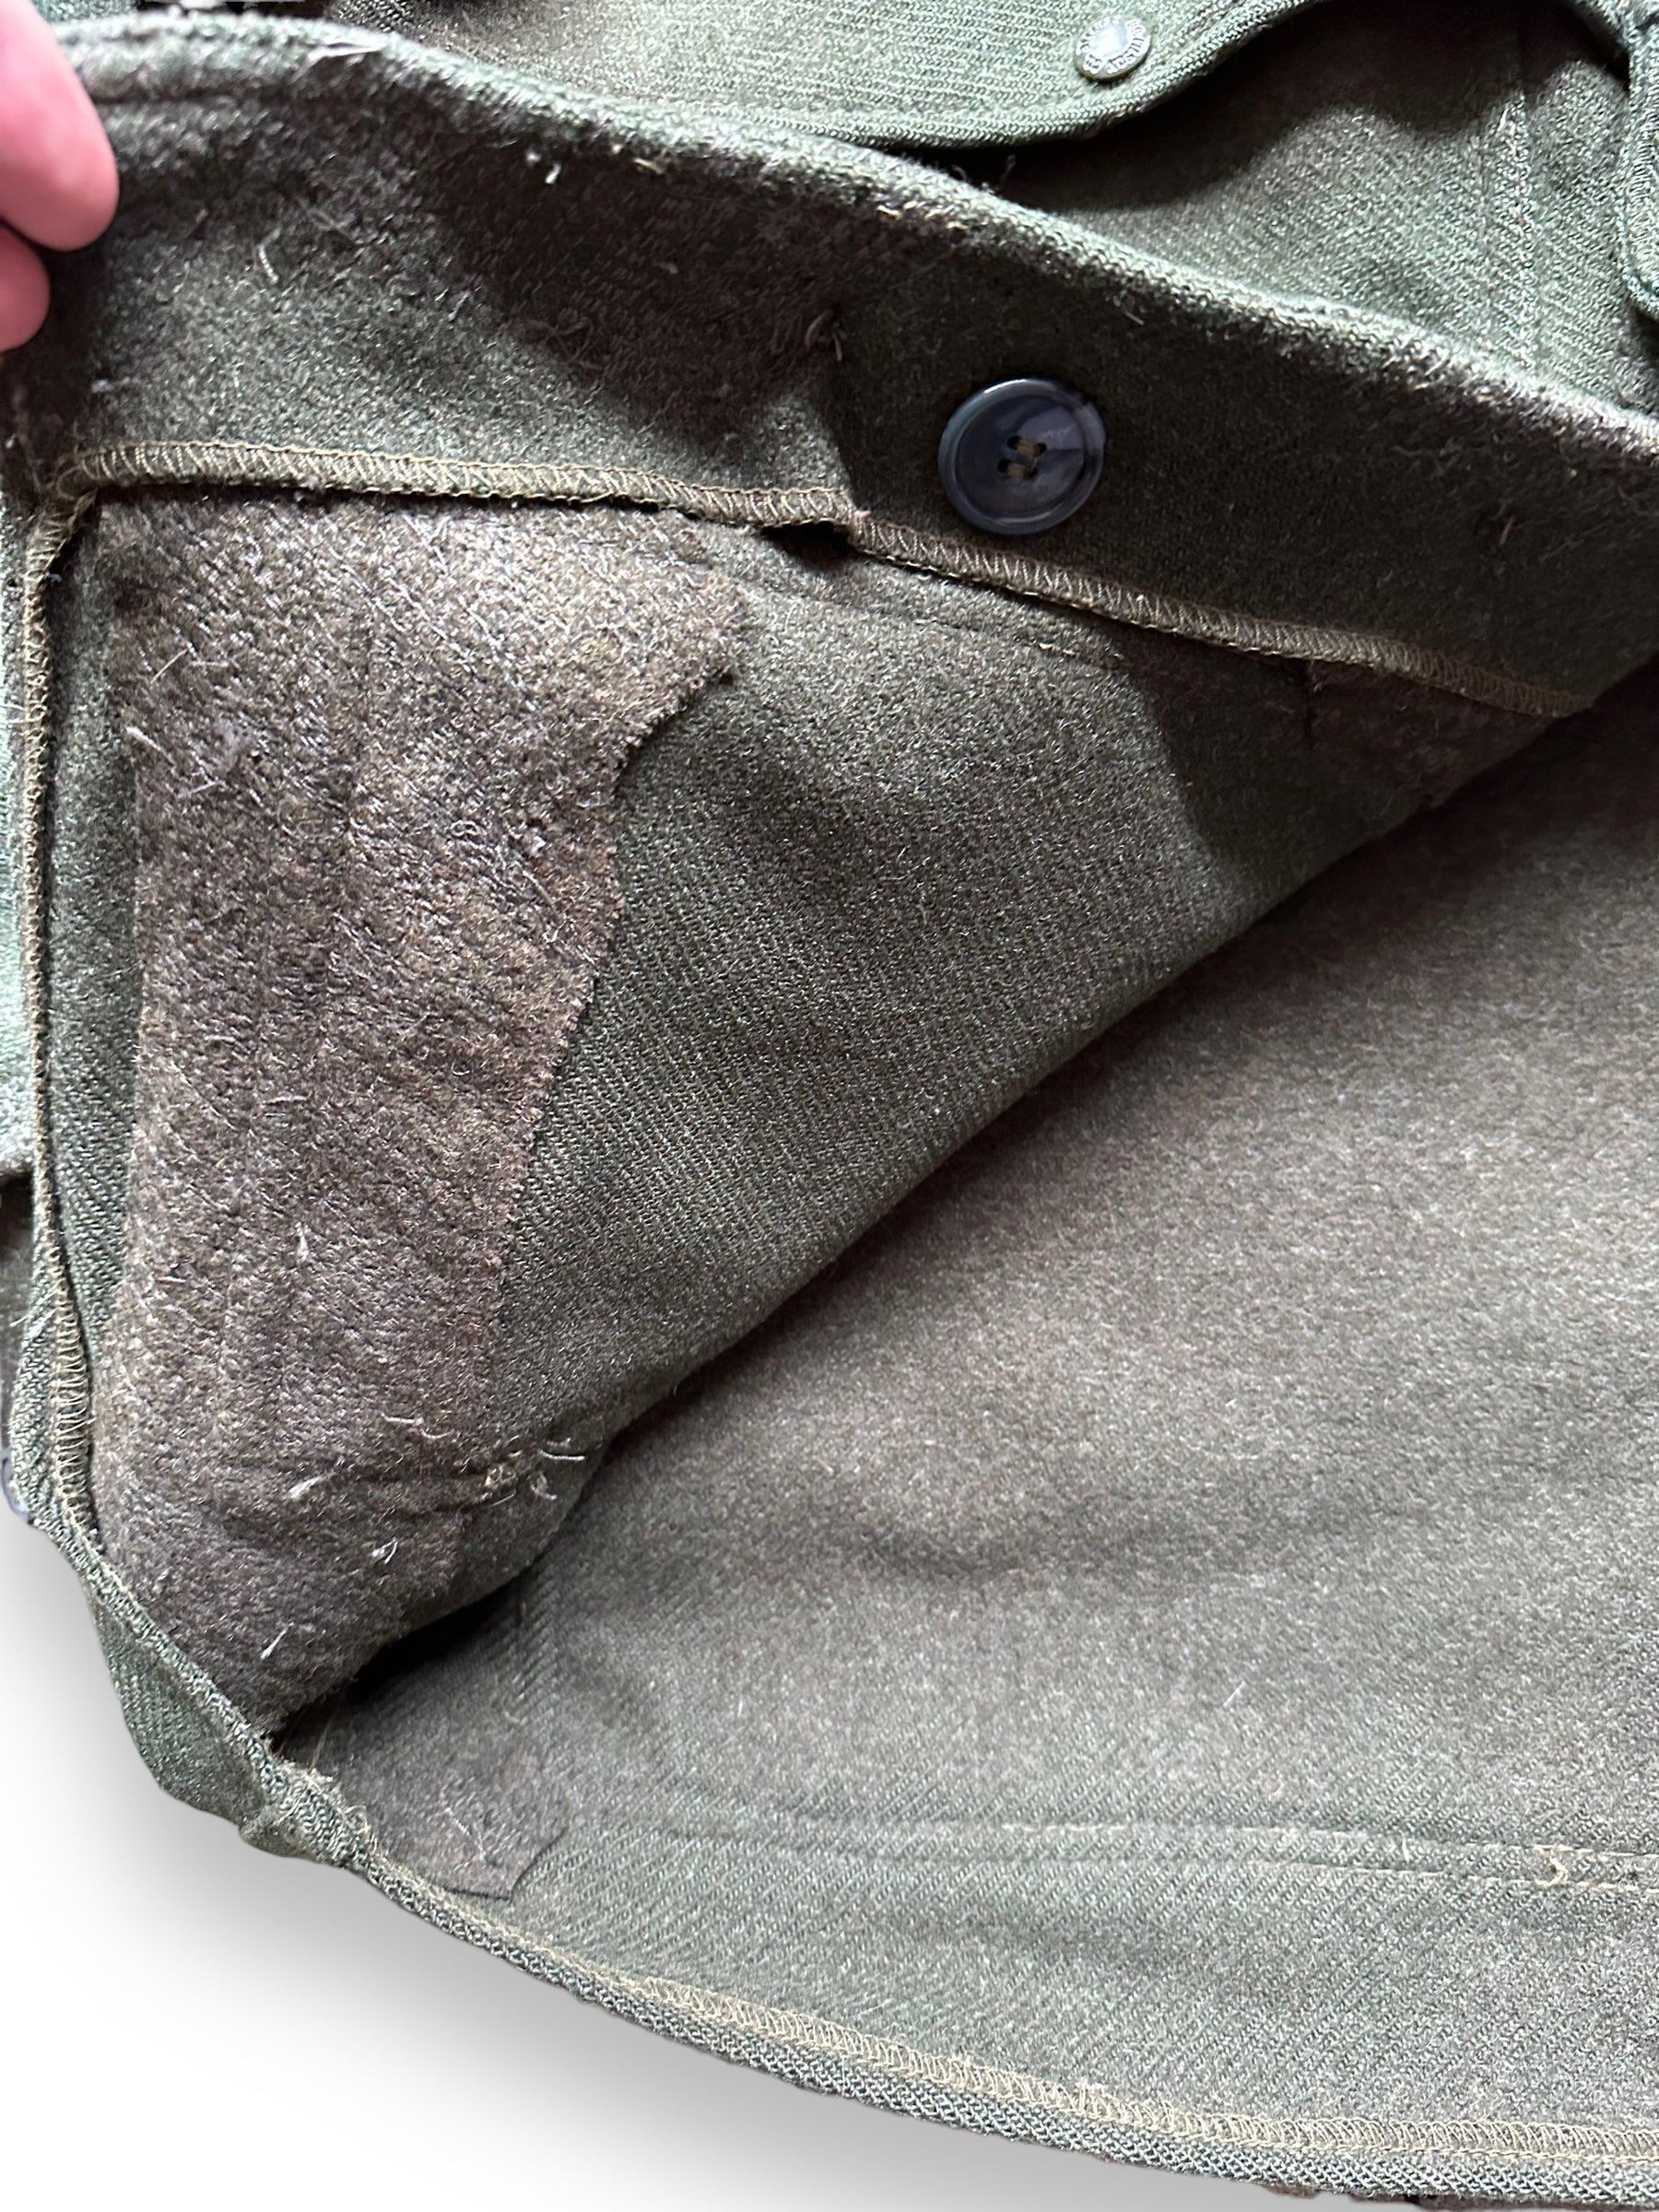 Additional Darn Repairs on Vintage Filson Forest Green Repaired Double Mackinaw Cruiser SZ 40 |  Vintage Filson Cruiser Seattle | Vintage Workwear Seattle